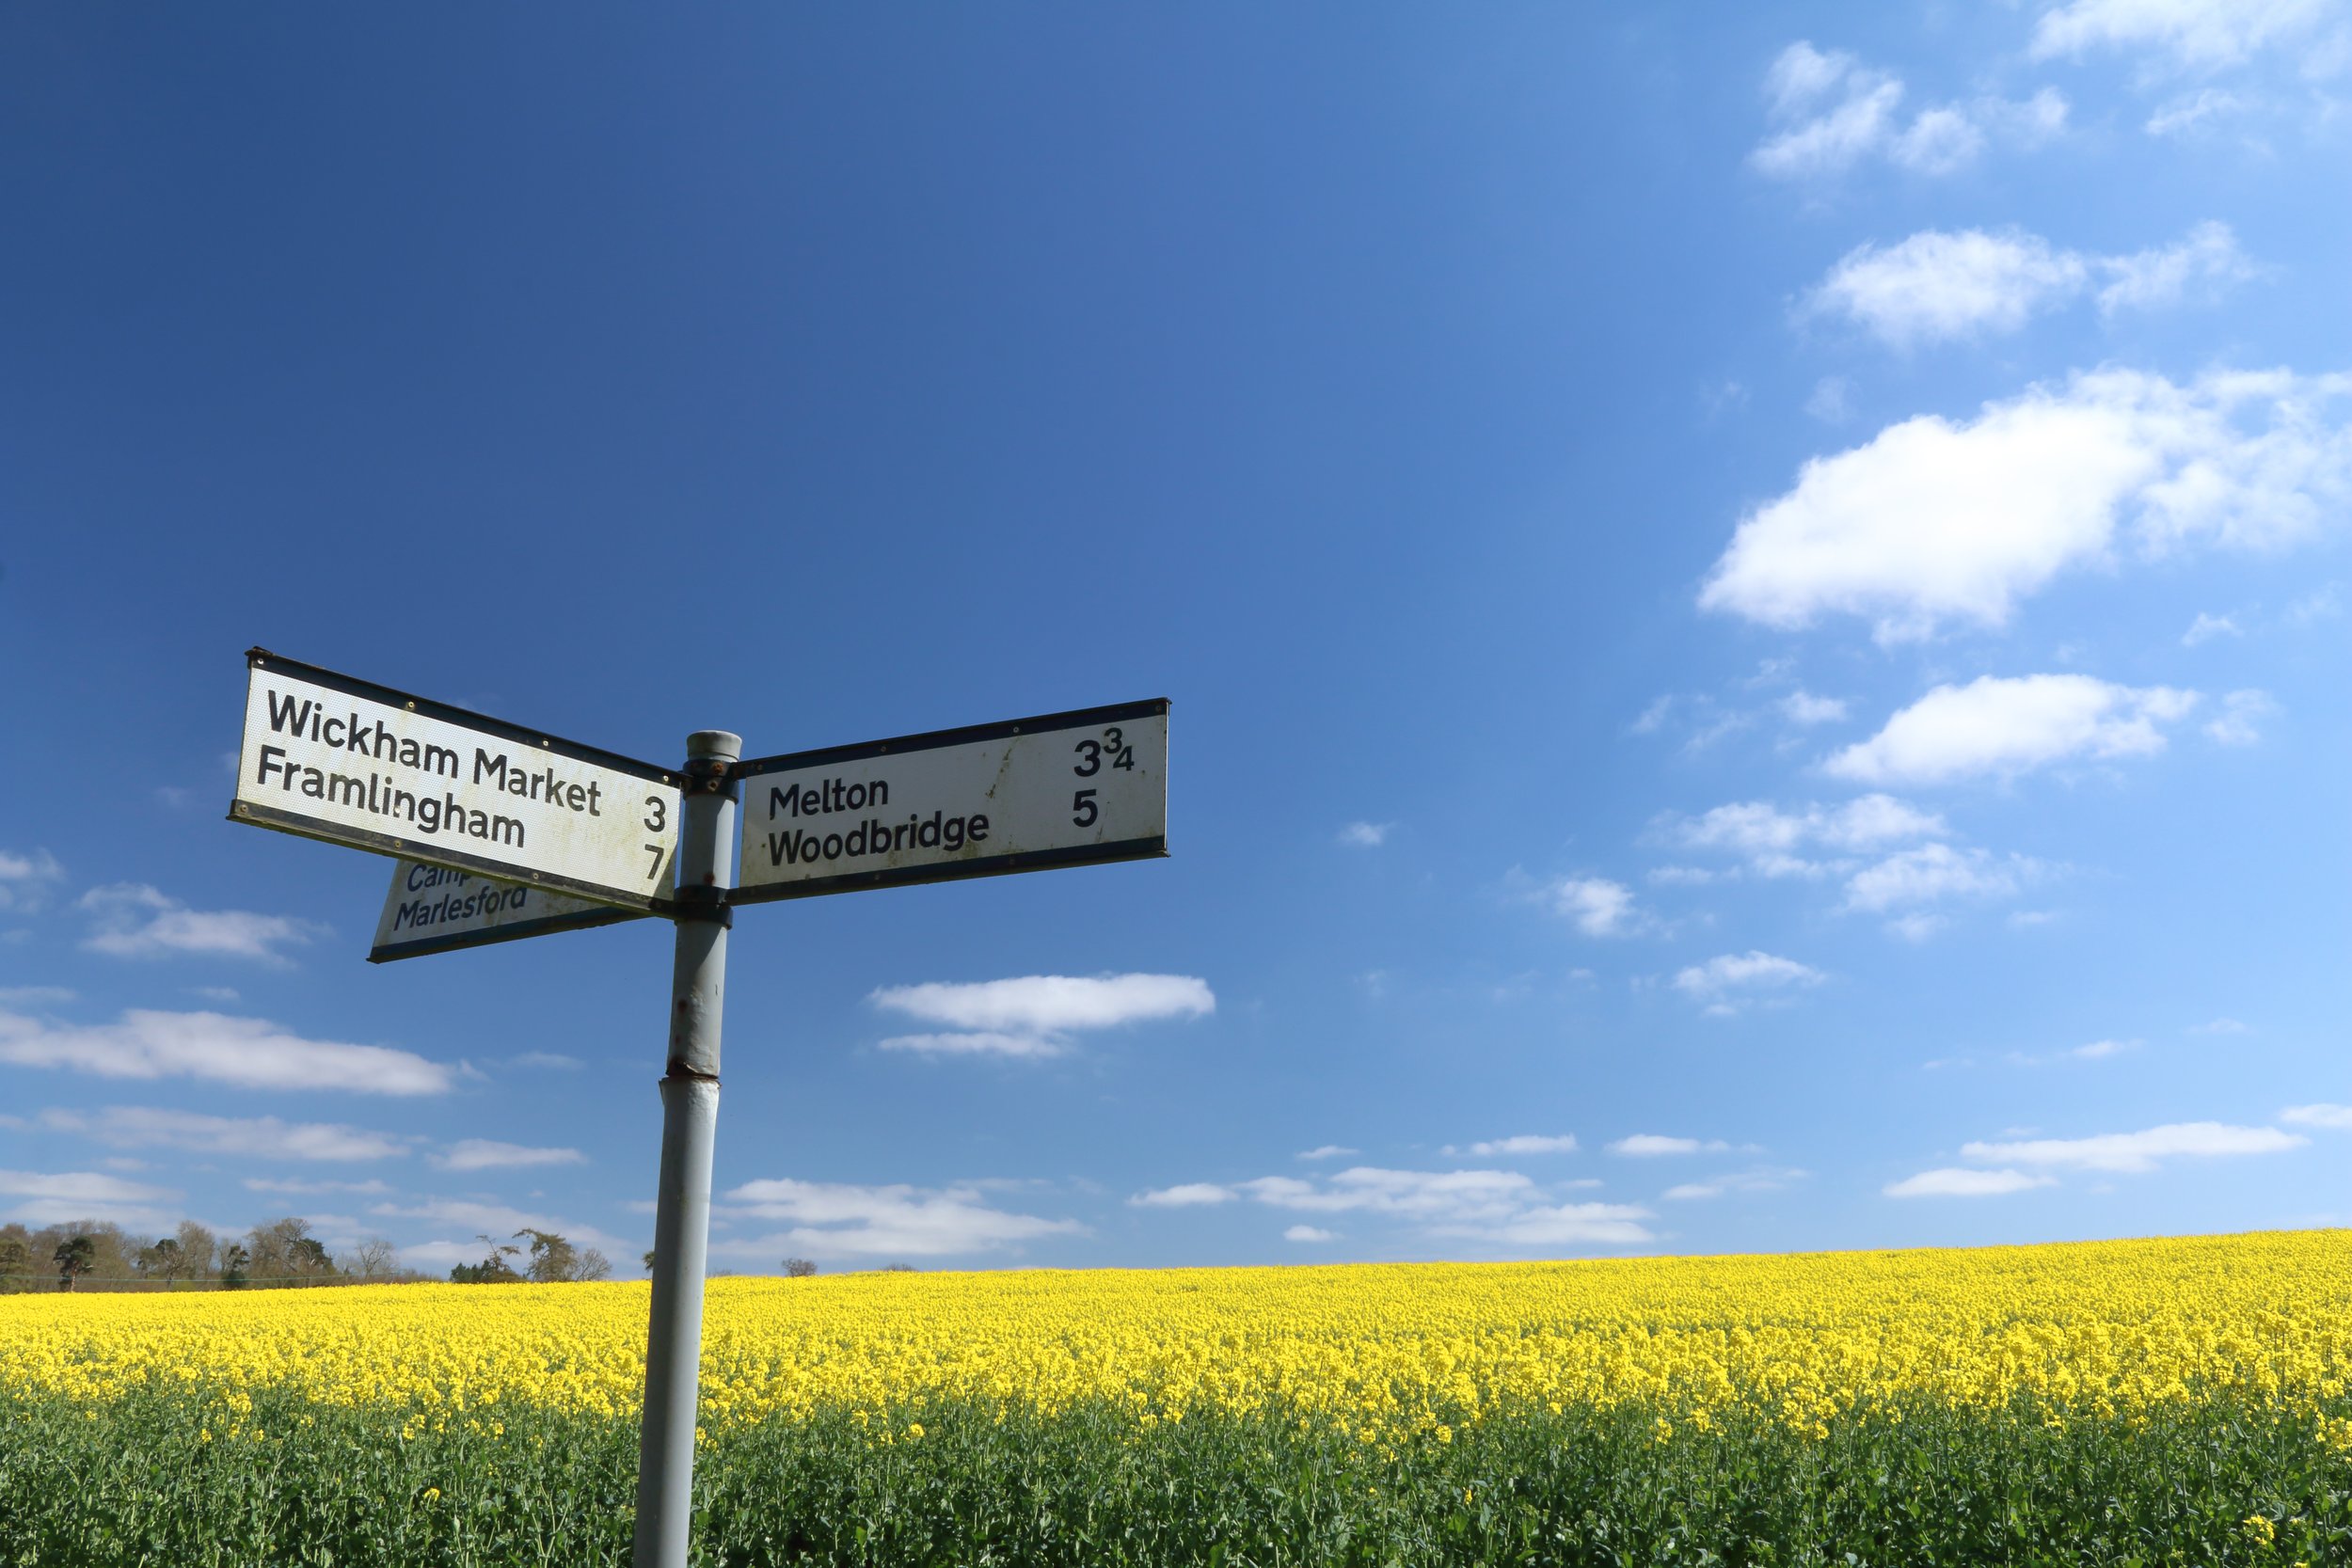 A rural Suffolk scene of a field of oilseed rape in full flower, captured in late April, with a signpost at crossroads pointing to the market towns of Framlingham and Woodbridge and other local villages. (1).jpg